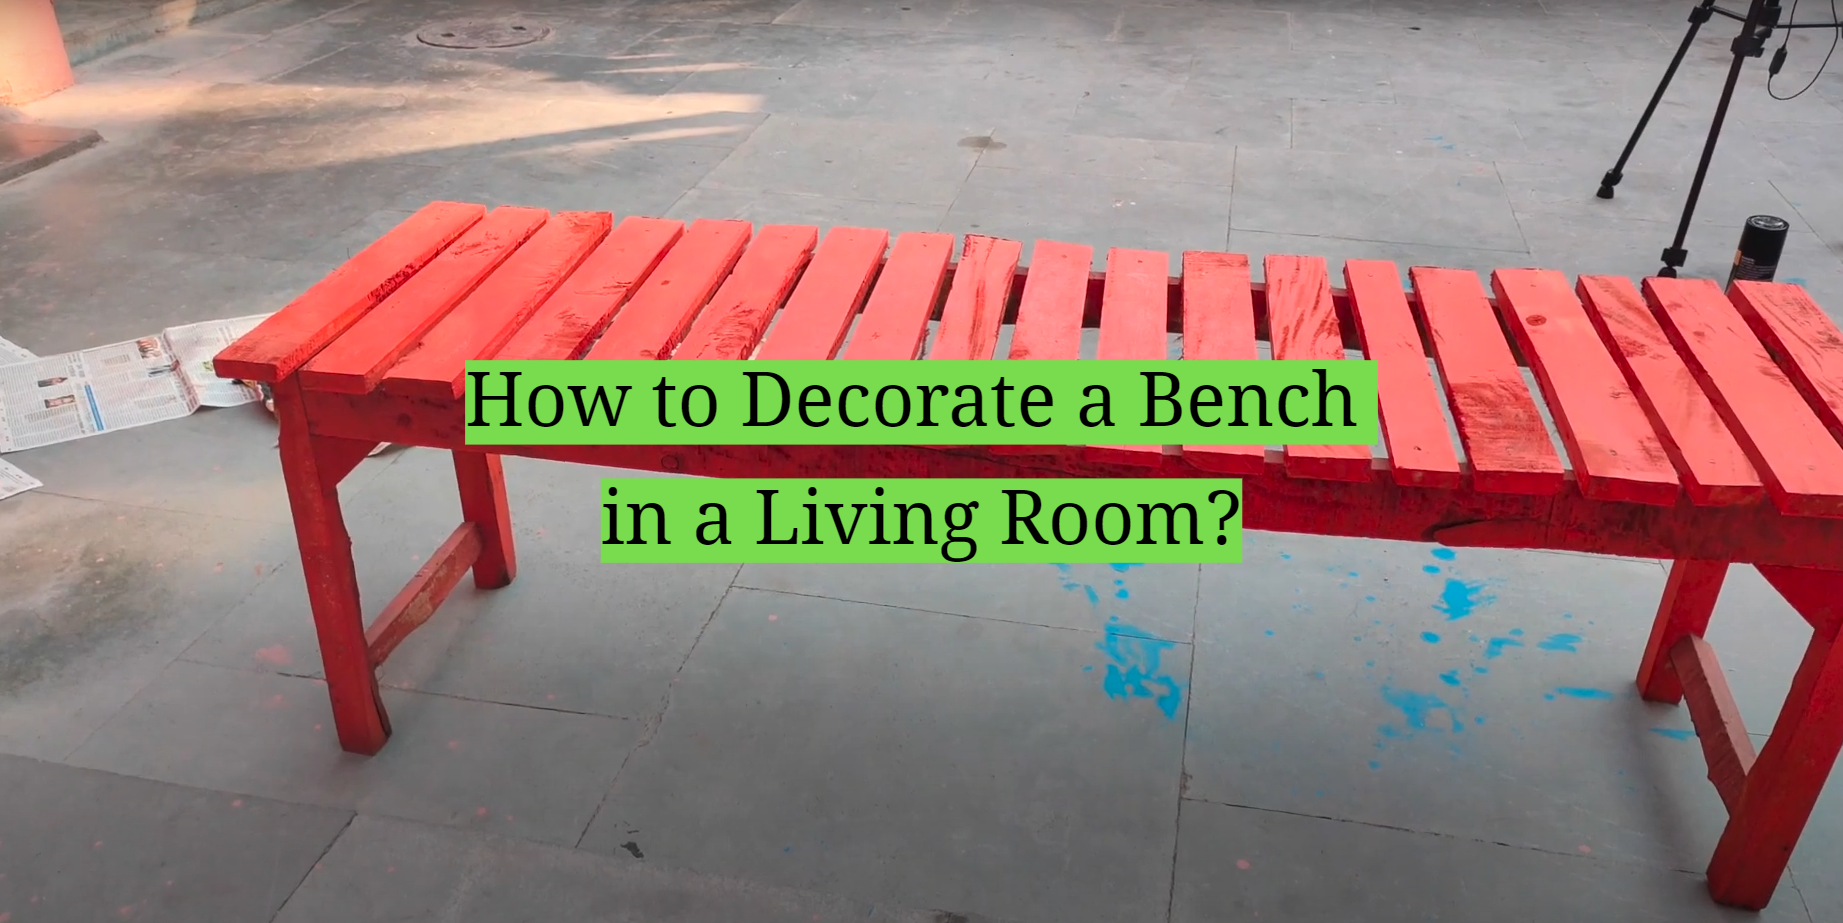 How to Decorate a Bench in a Living Room?